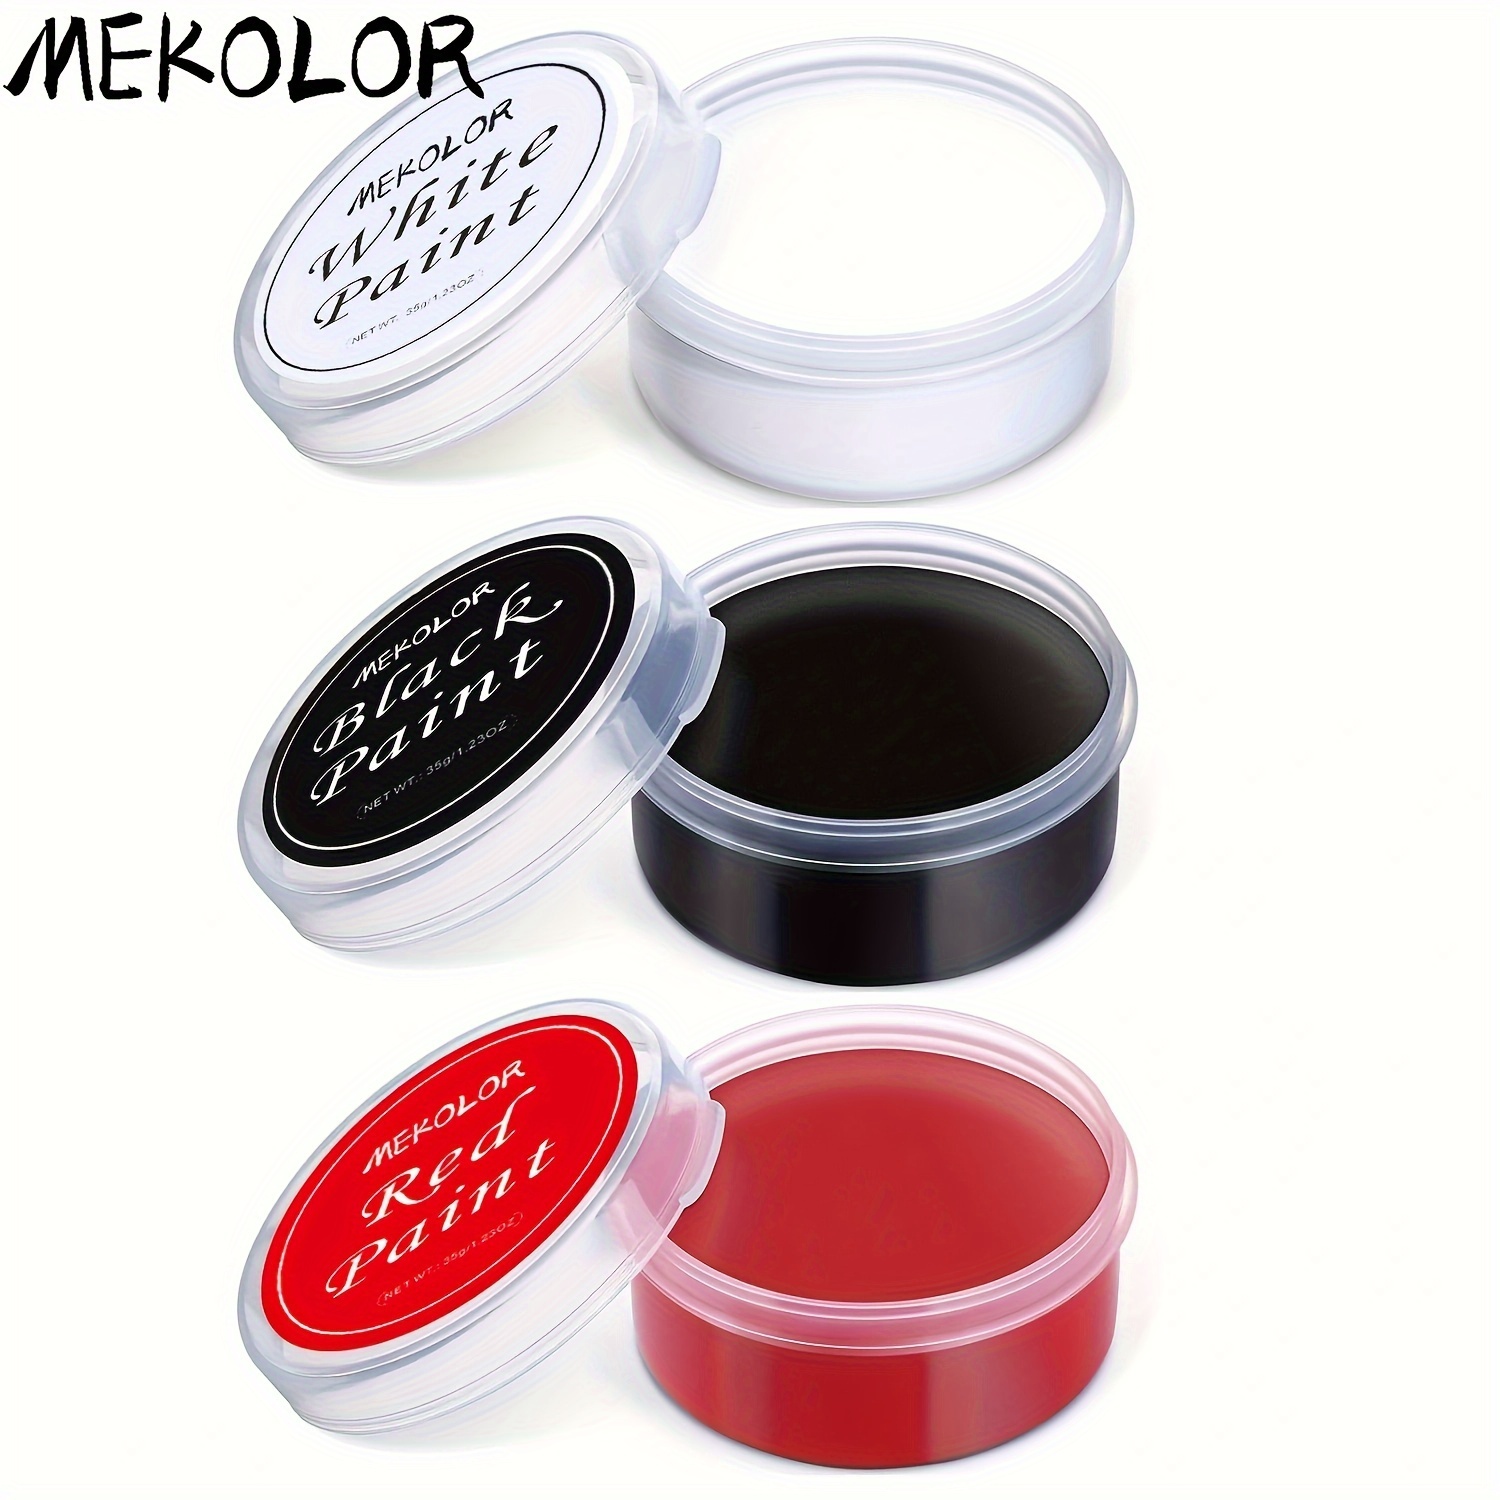 

35g Black White Red Body Painting, Adult Makeup Painting Palette For Theater Halloween Party Cosplay Clown Sfx